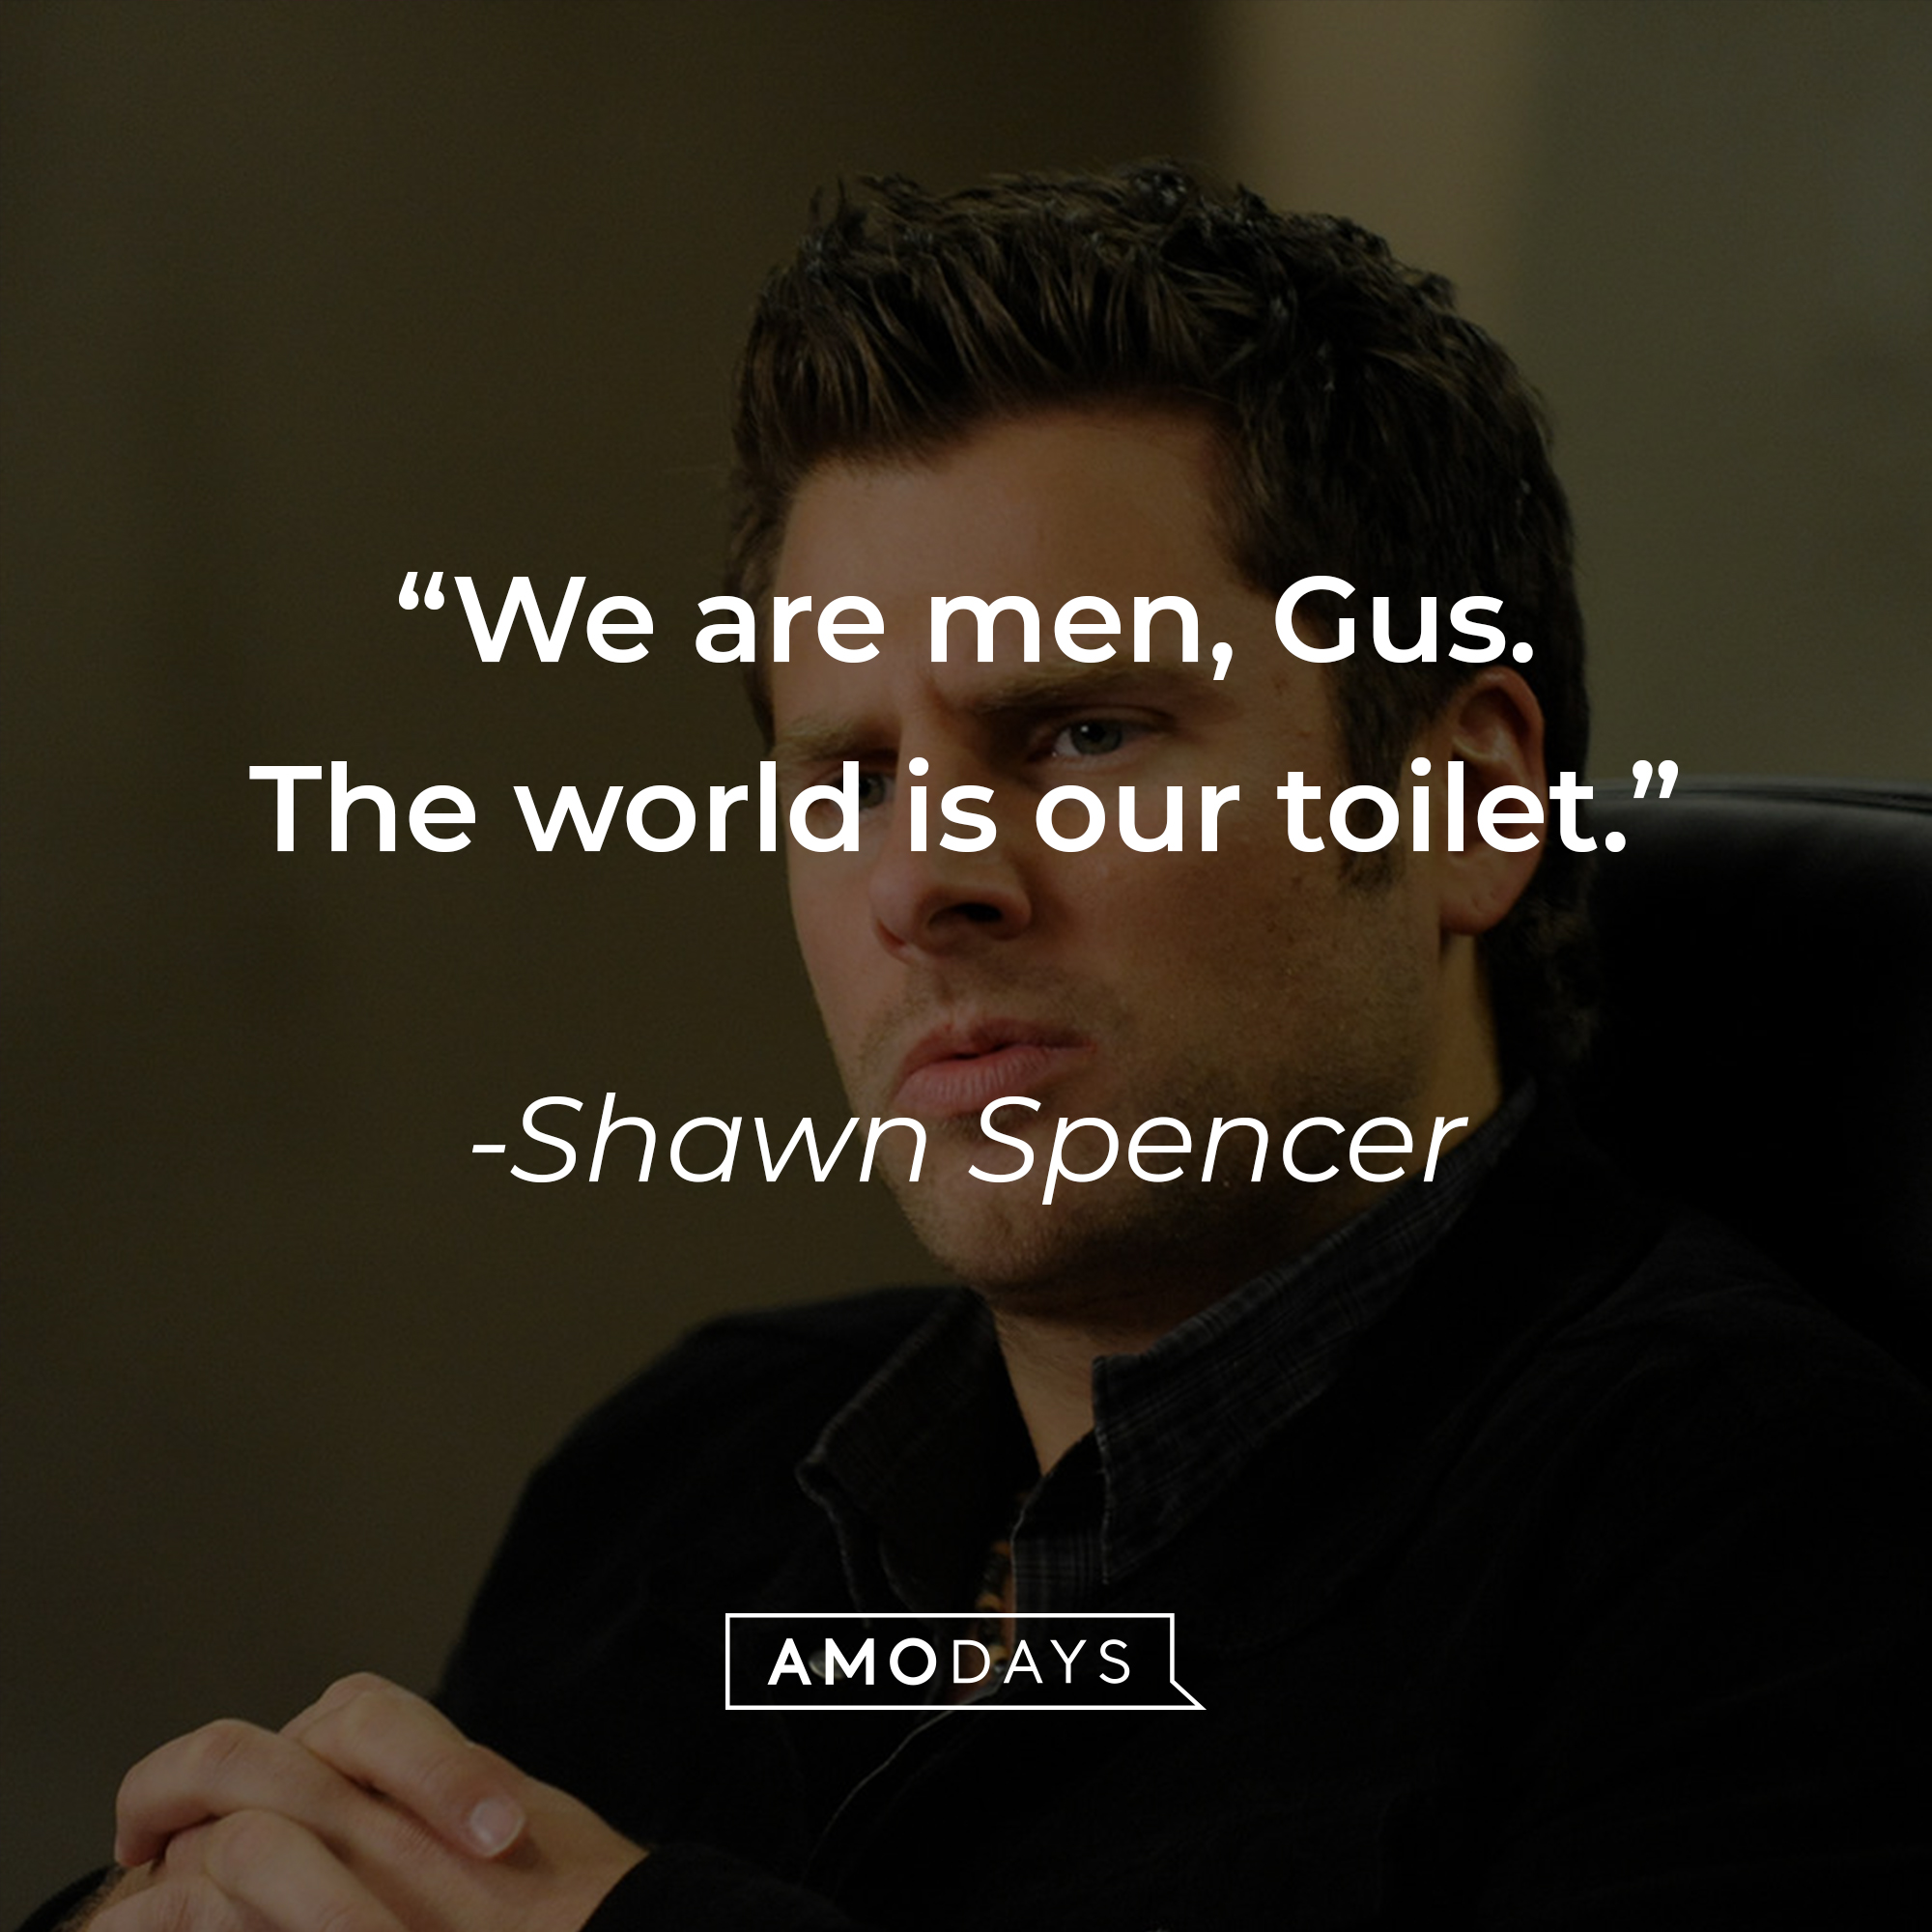 Shawn Spencer, with his quote: "We are men, Gus. The world is our toilet." | Source: facebook.com/PsychPeacock